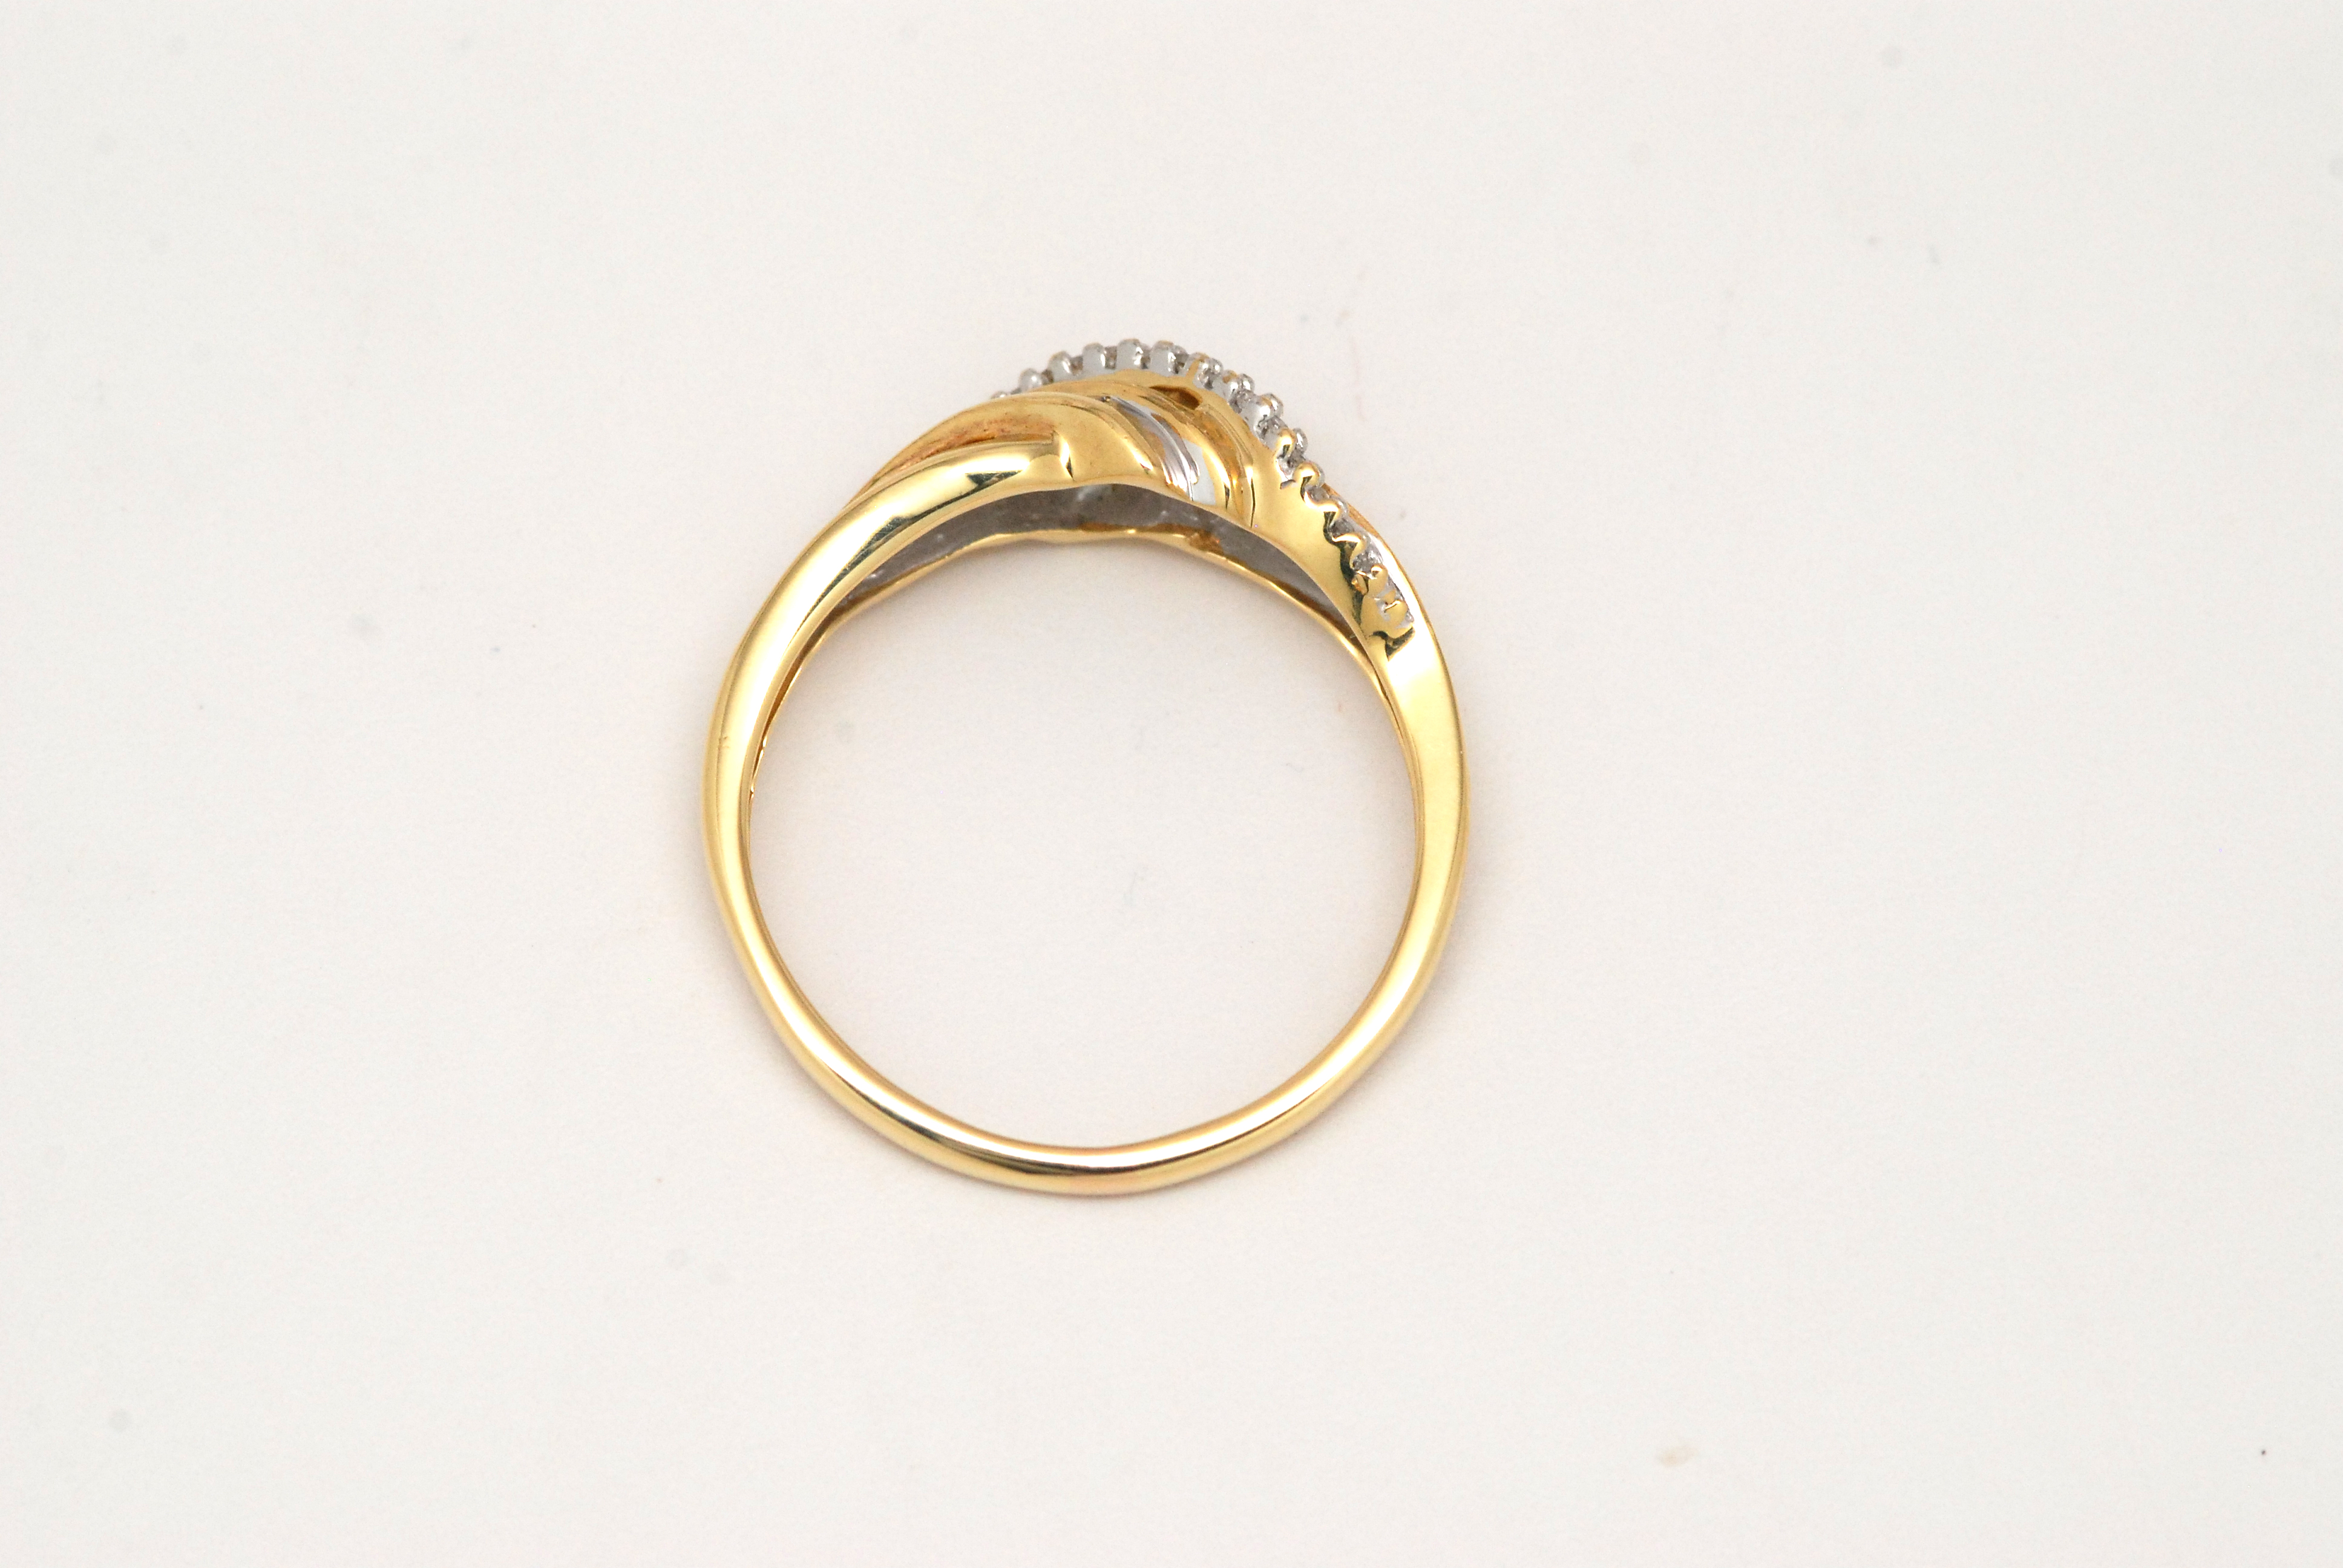 Baguette Round Diamond Bypass Ring 10k Yellow Gold - Kappy's Jewelry